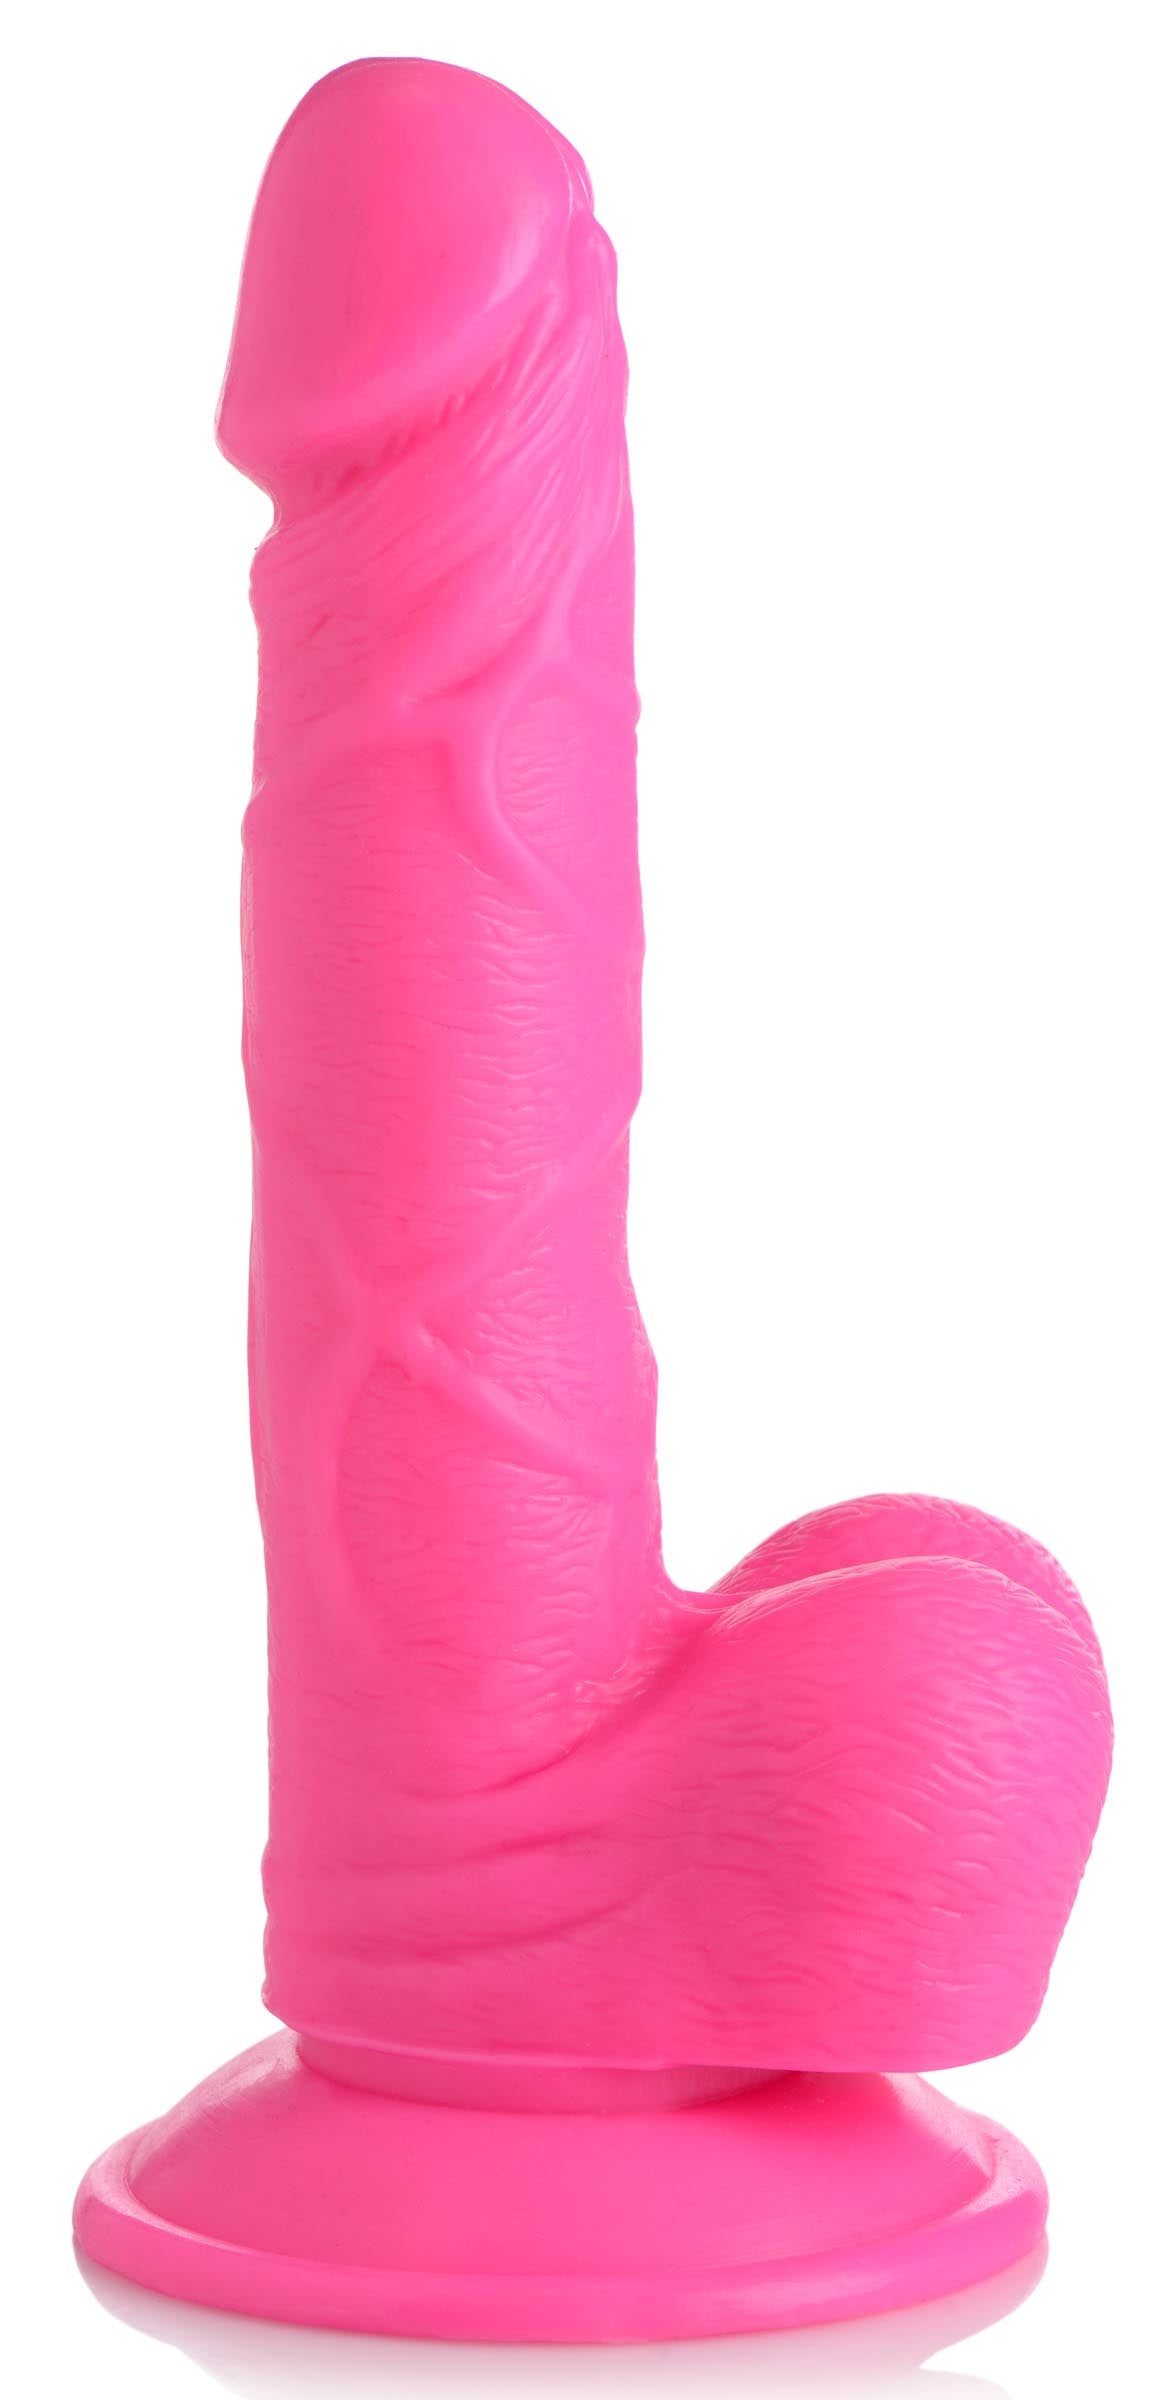 6.5 Inch Dildo With Balls - Pink